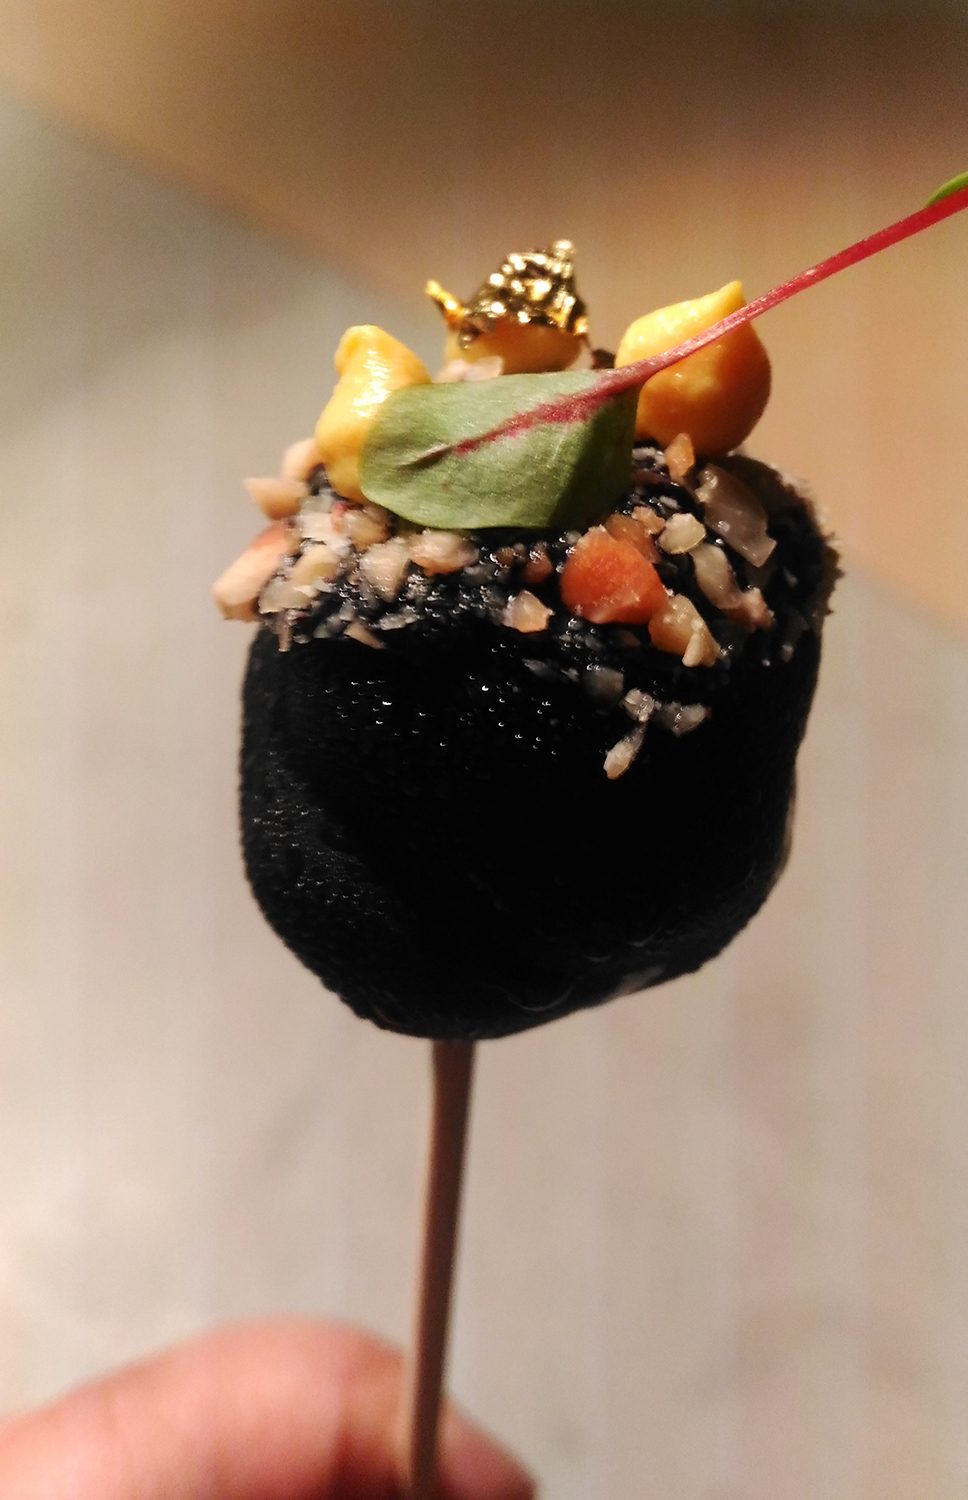 FLAVOR BURST. Sweet meets savory with duck liver dipped in chocolate. Photo by Alexis Betia/Rappler 